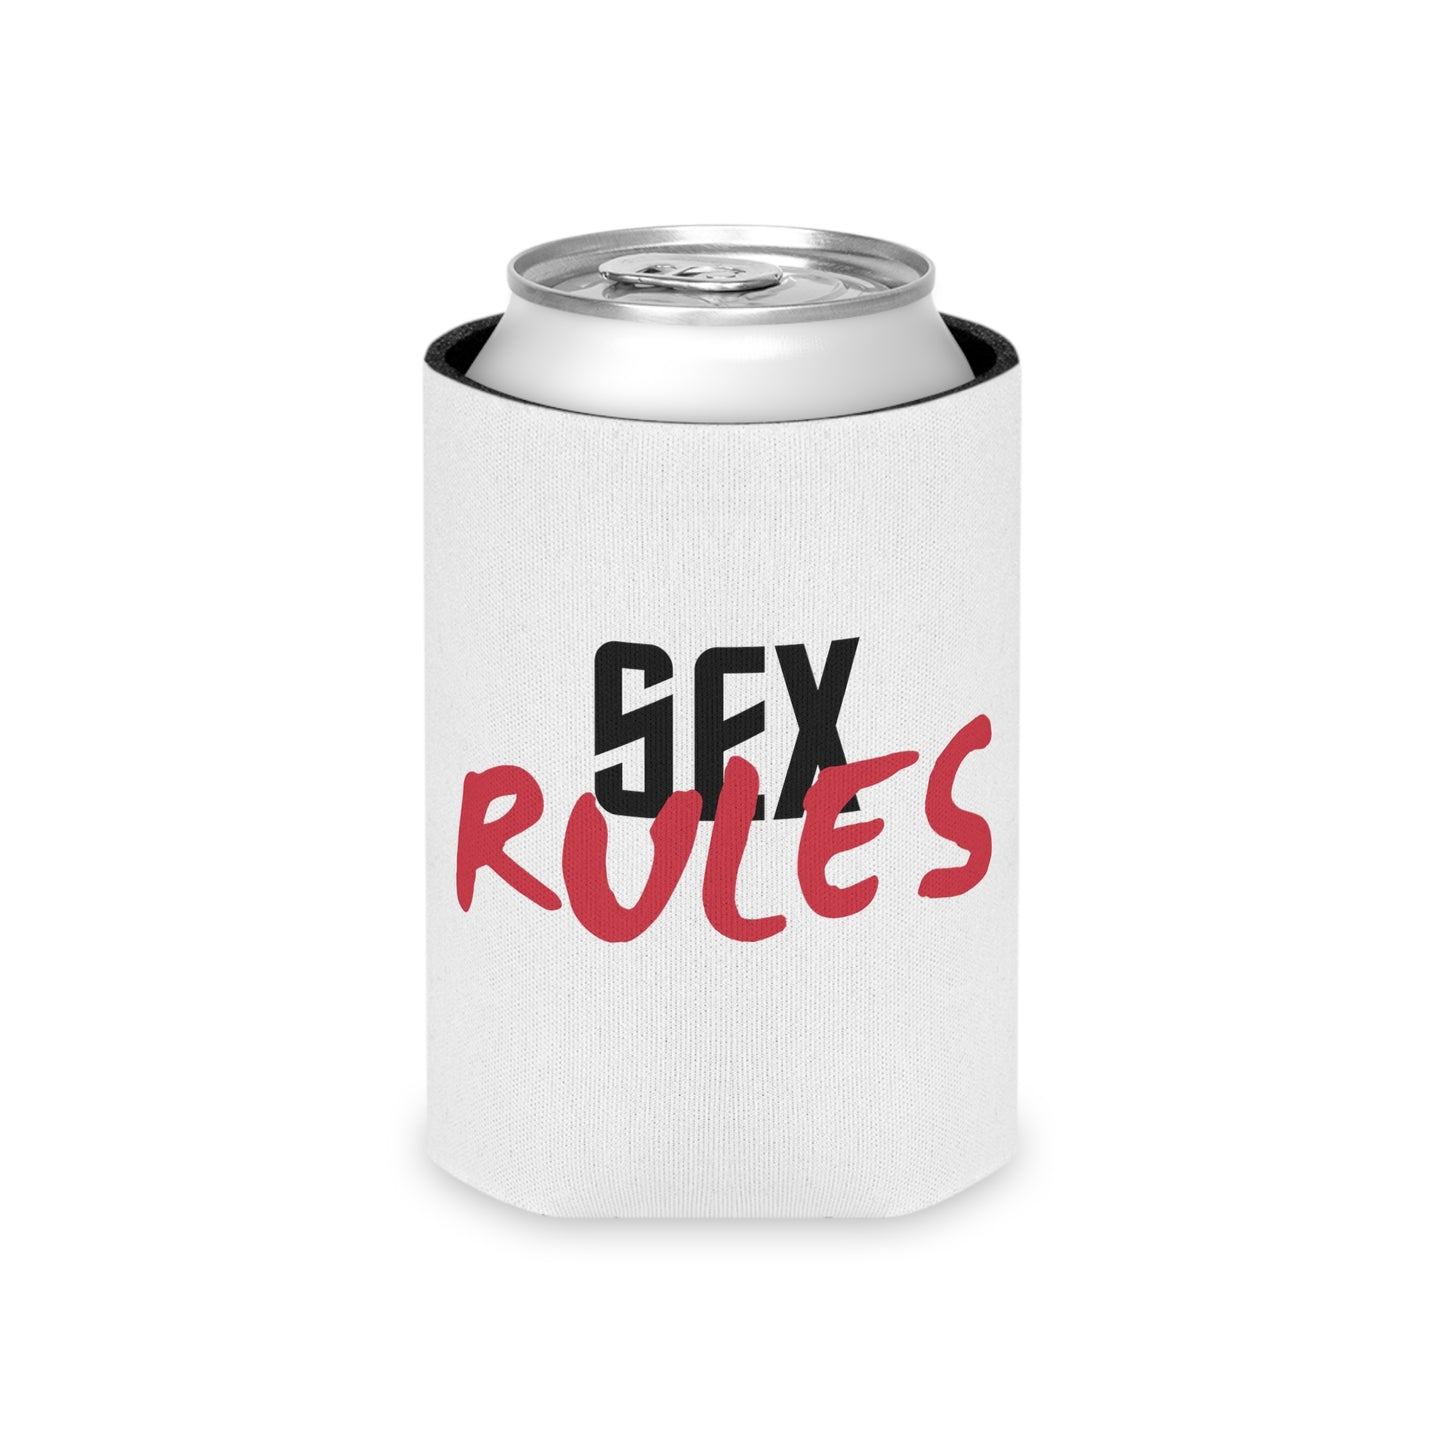 "Sex Rules" Can Cooler